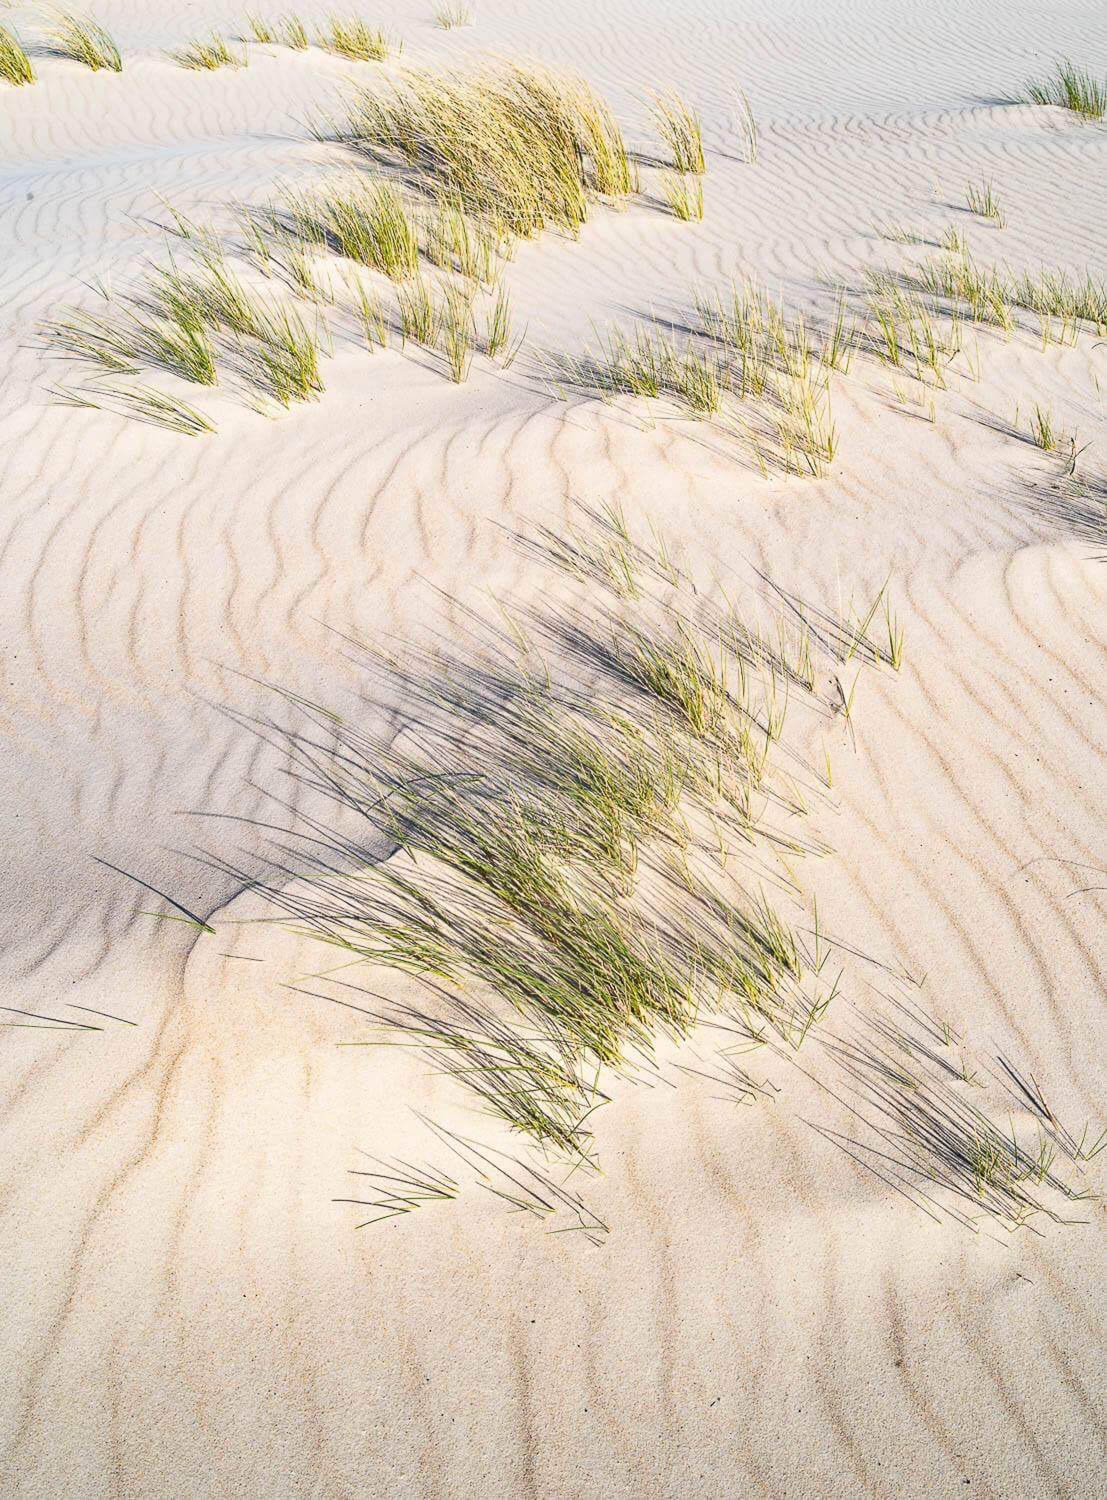 Bushes on a white desert, Grass growing in the shifting sands of Bay of Fires